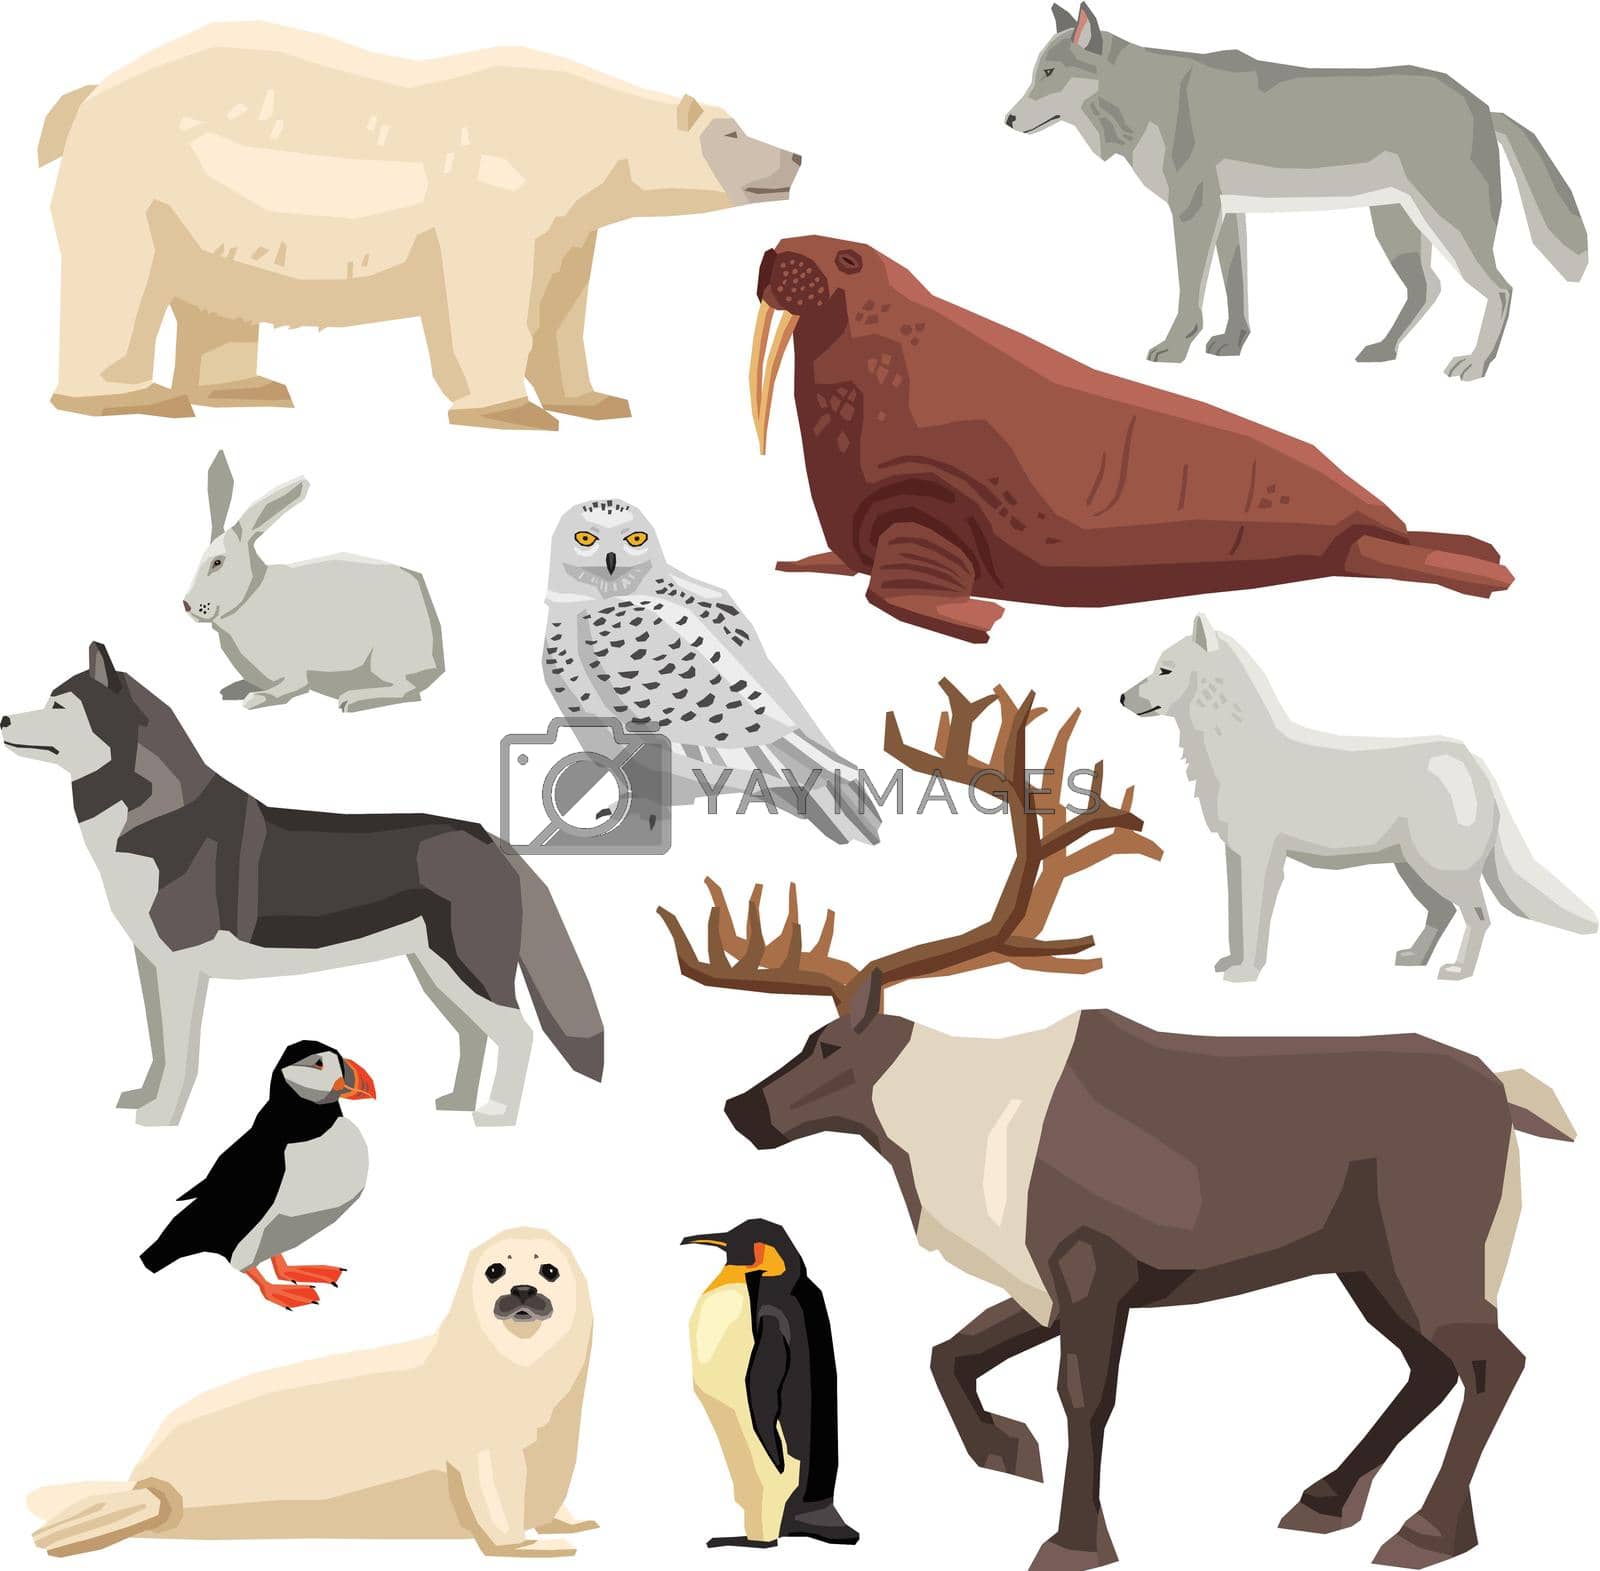 DIfferent flat polar animals and birds set isolated on white background vector illustration